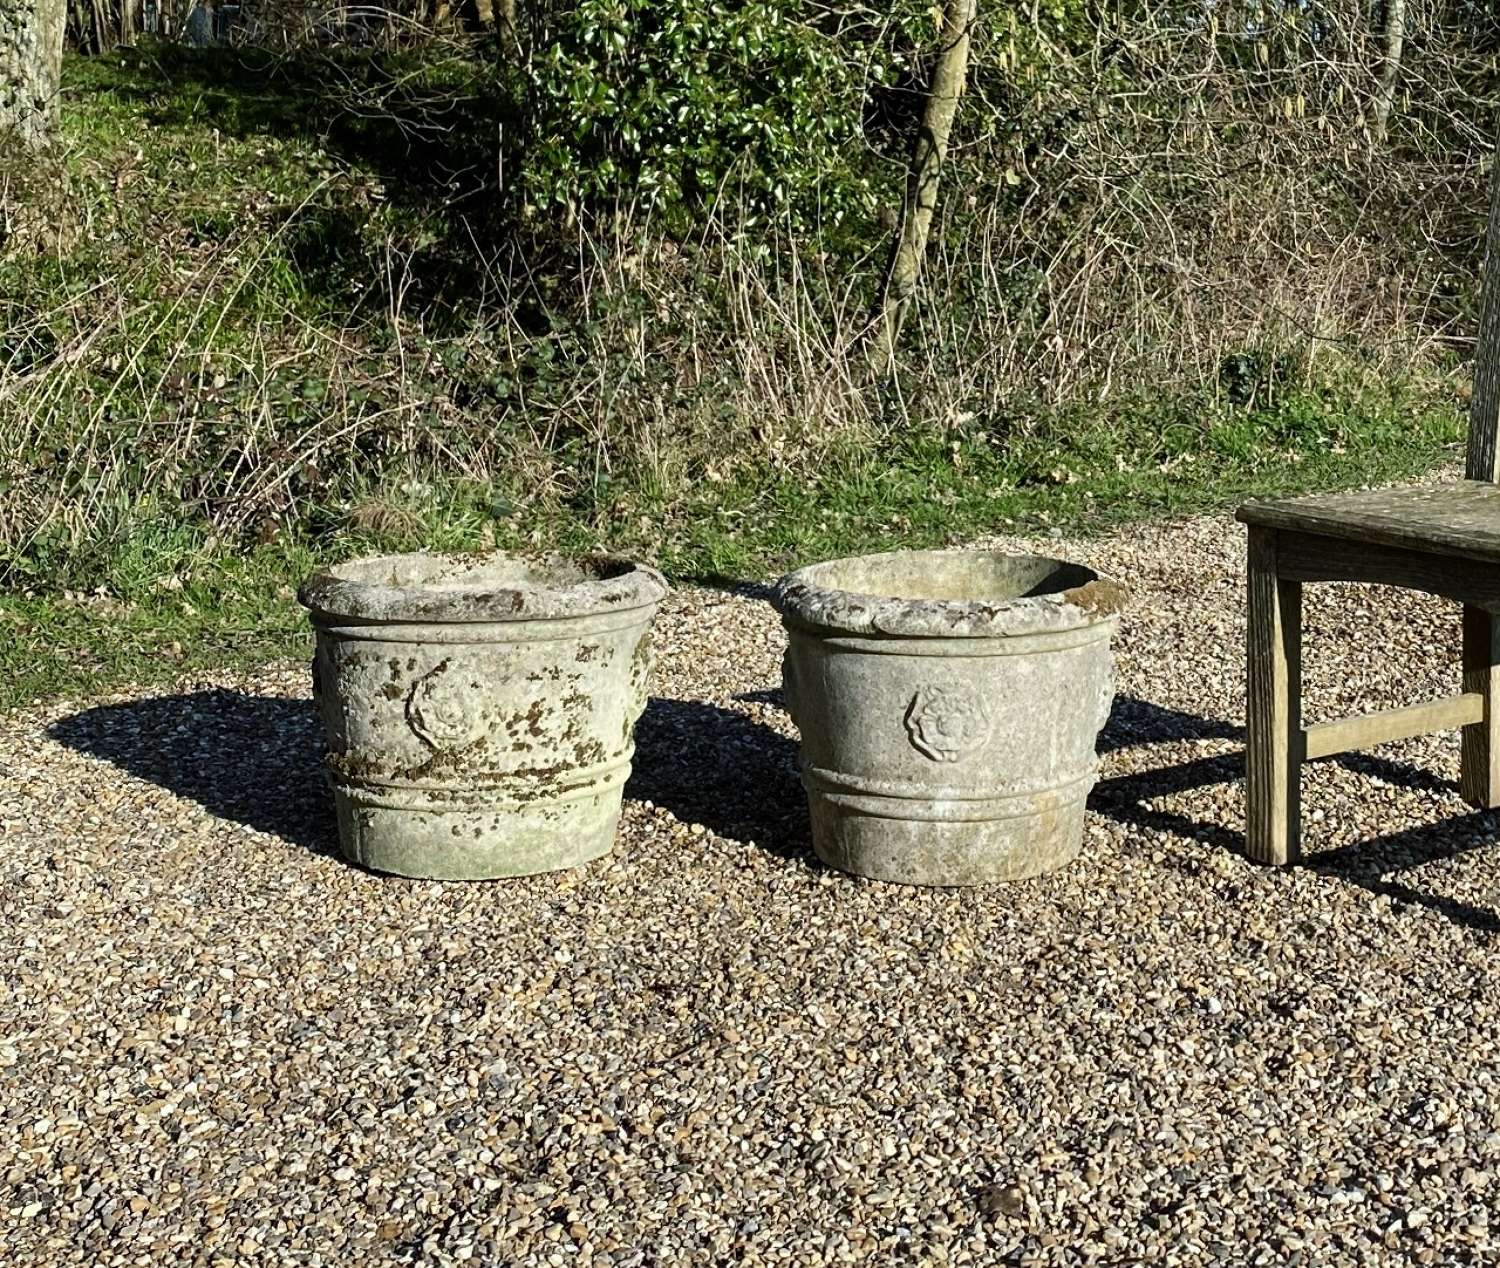 Pair of Patinated Rose Planters